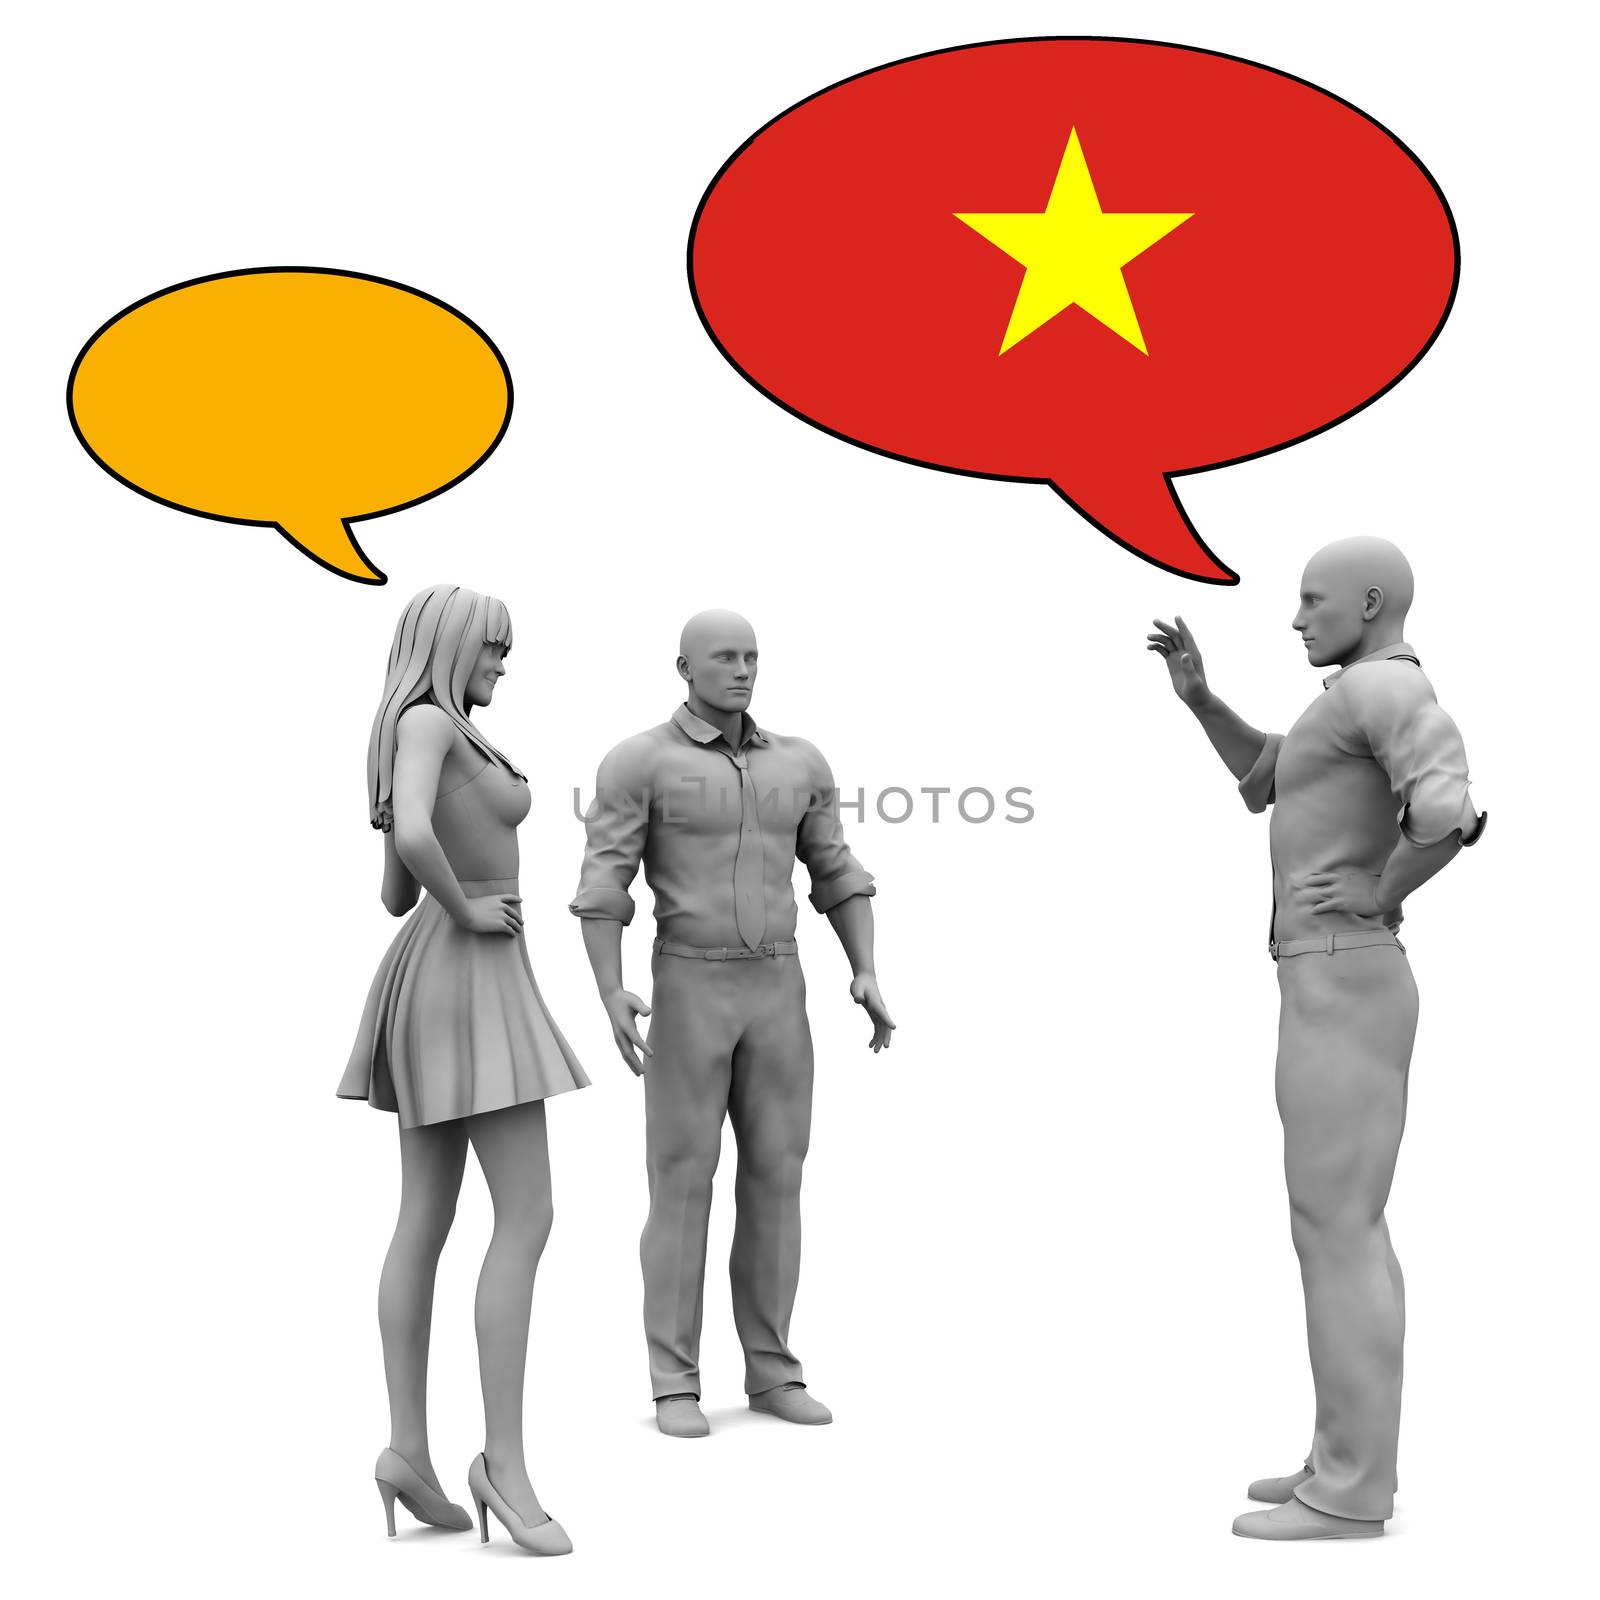 Learn Vietnamese Culture and Language to Communicate